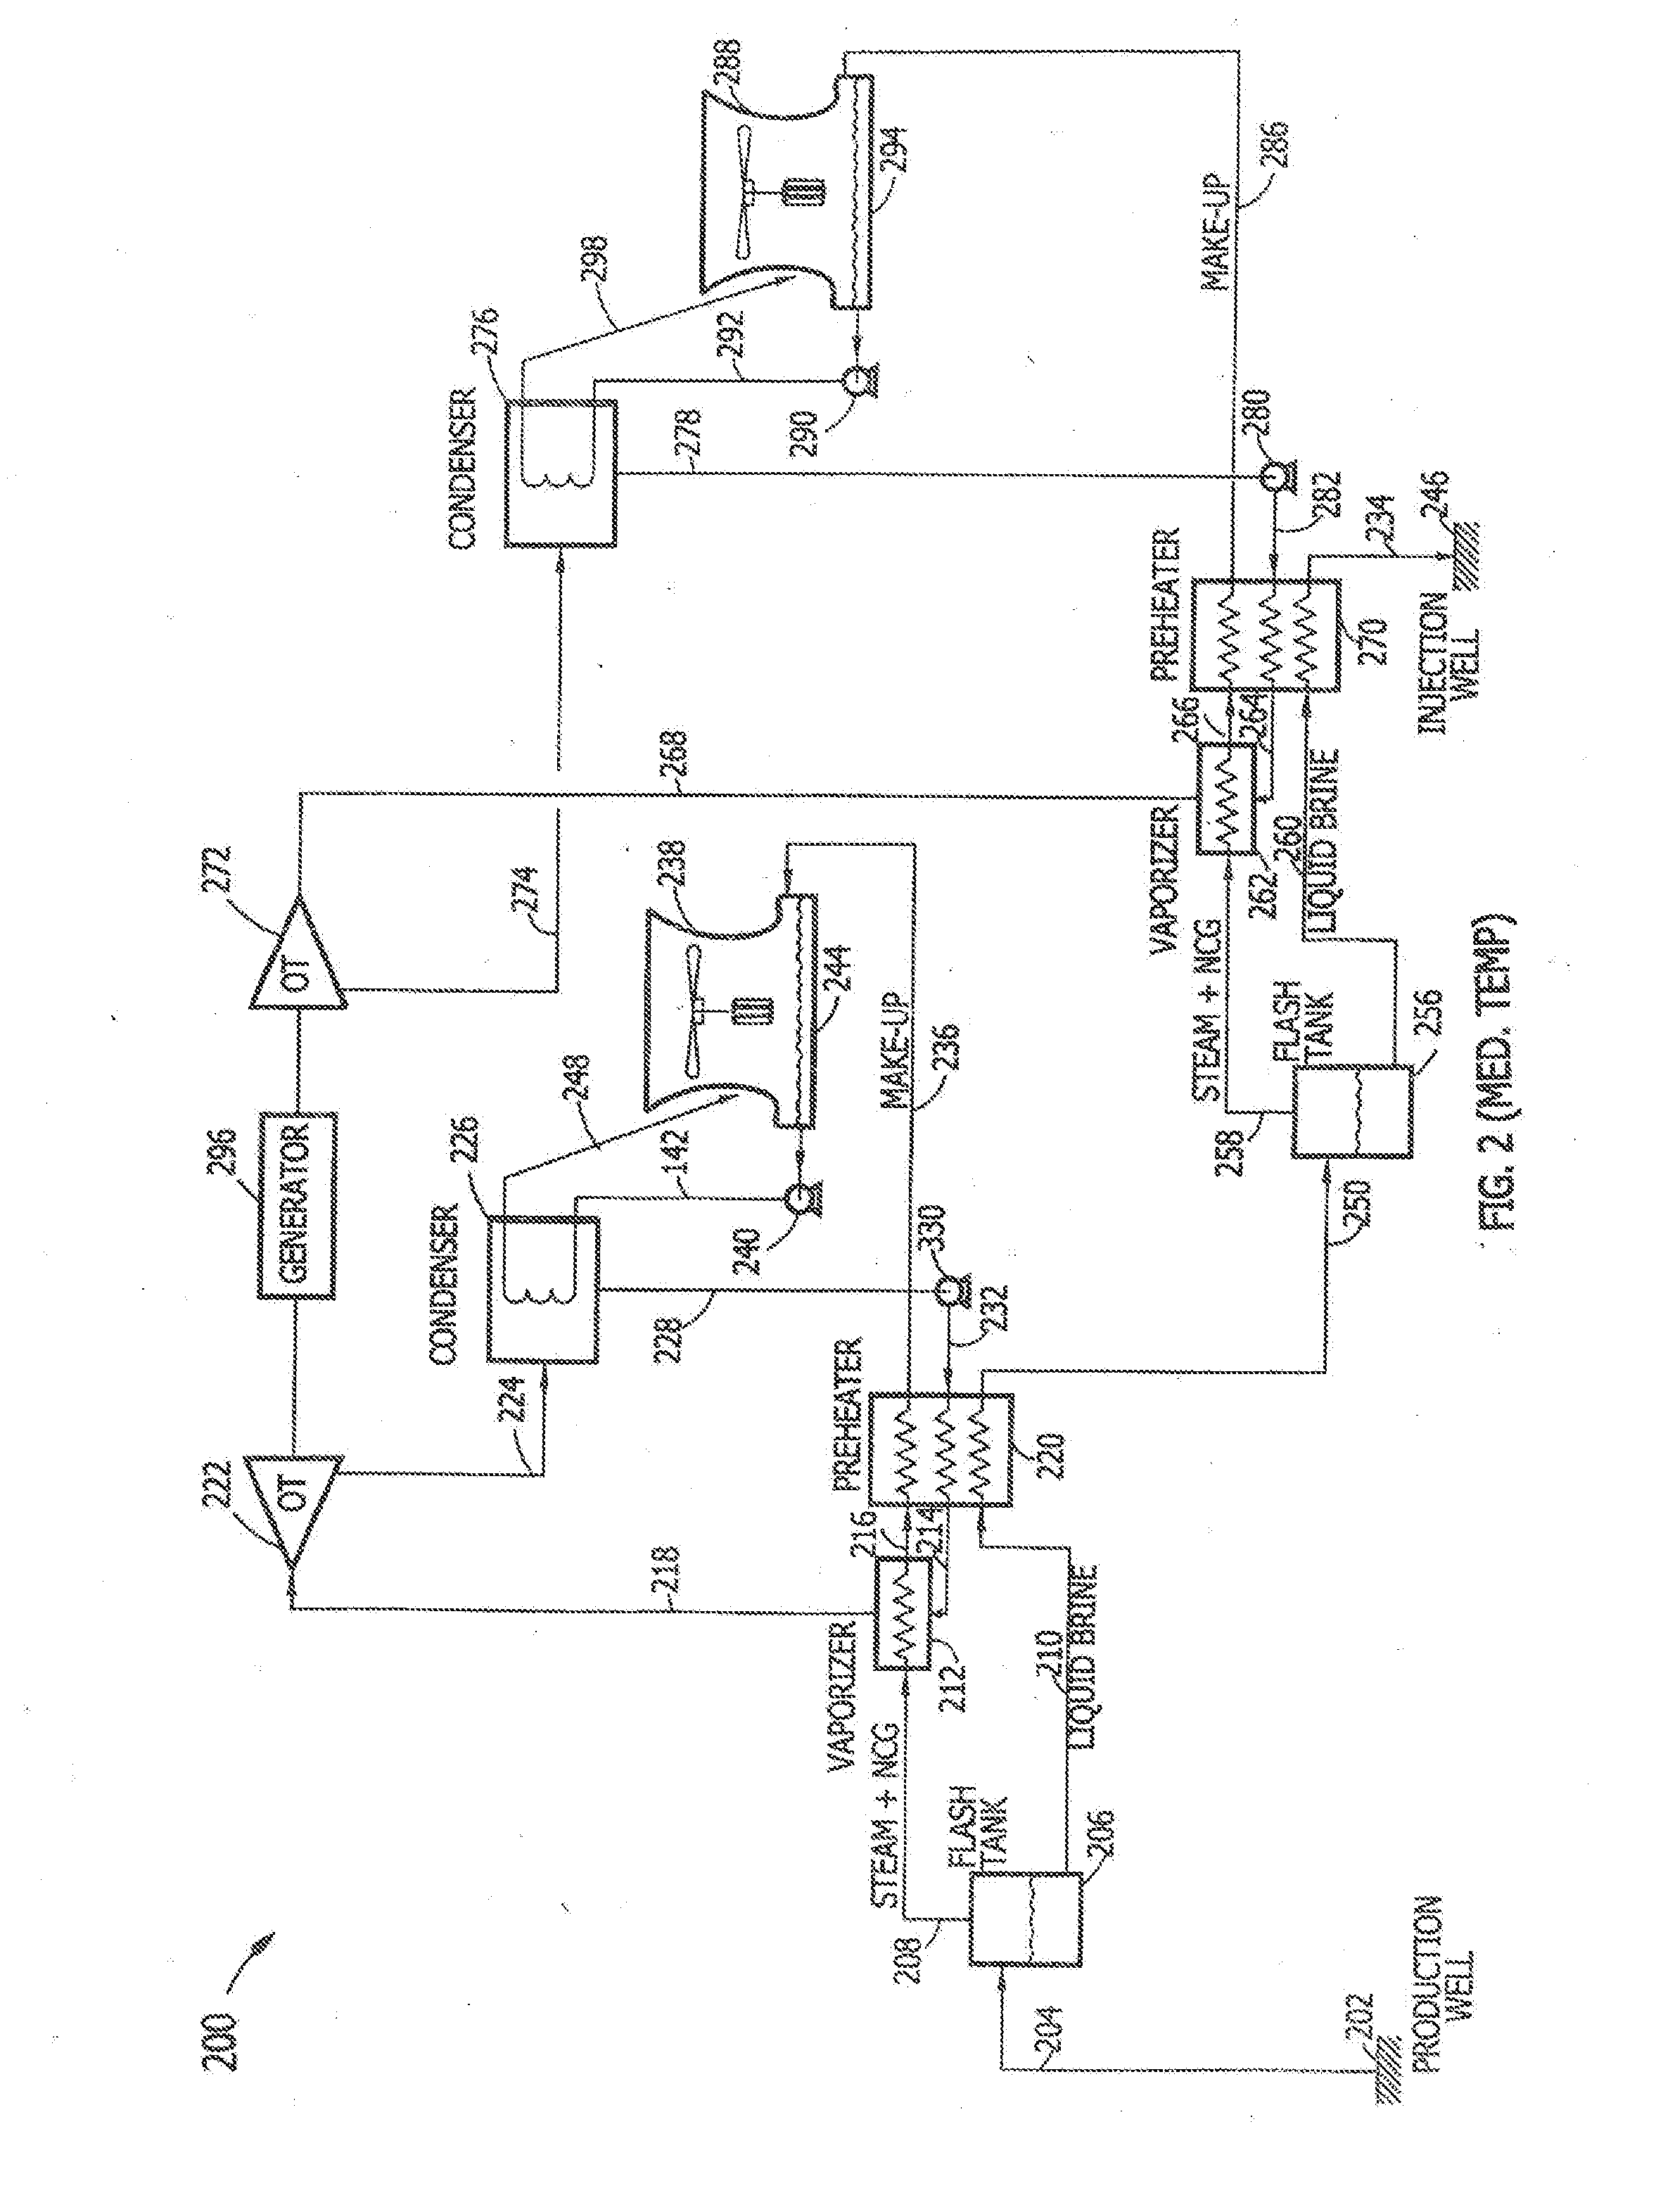 Method and apparatus for producing power from geothermal fluid